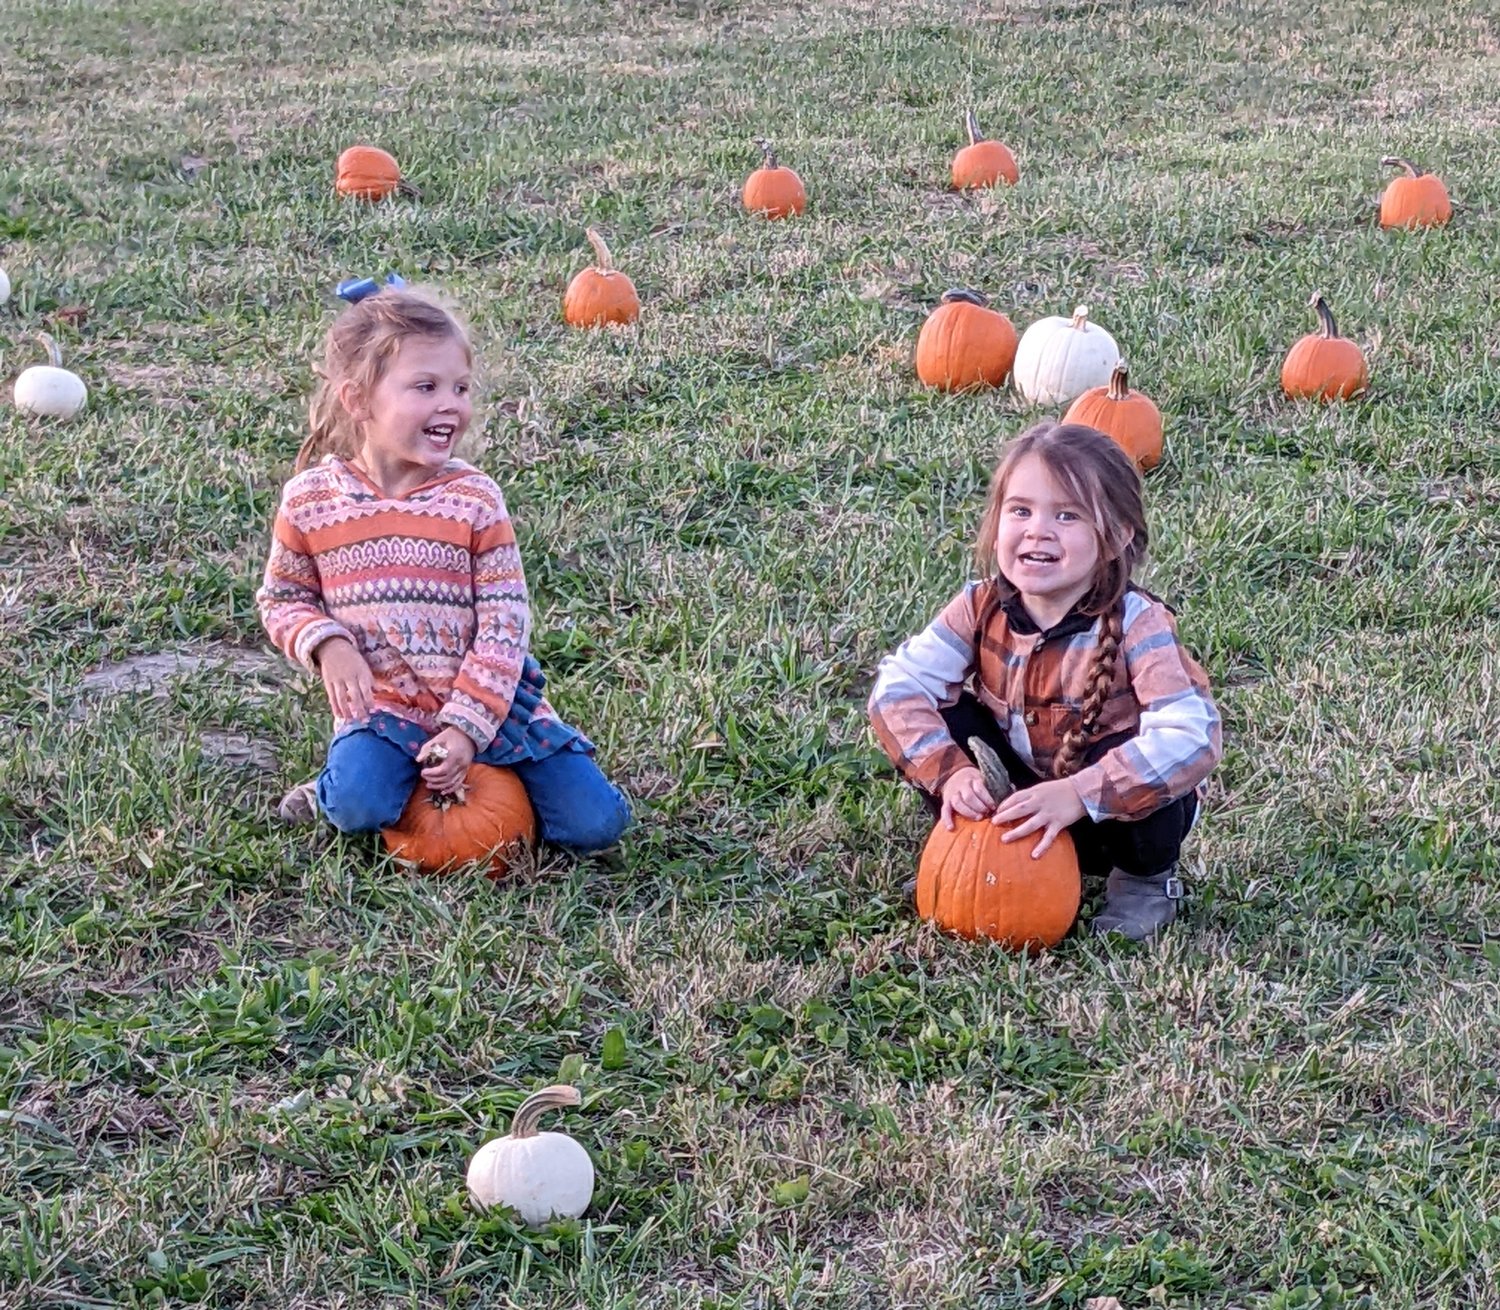 During their visit at 83 and Vine Farm, Gracie Swortwood and Harper Phillips excitedly claim their chosen pumpkins to take home.